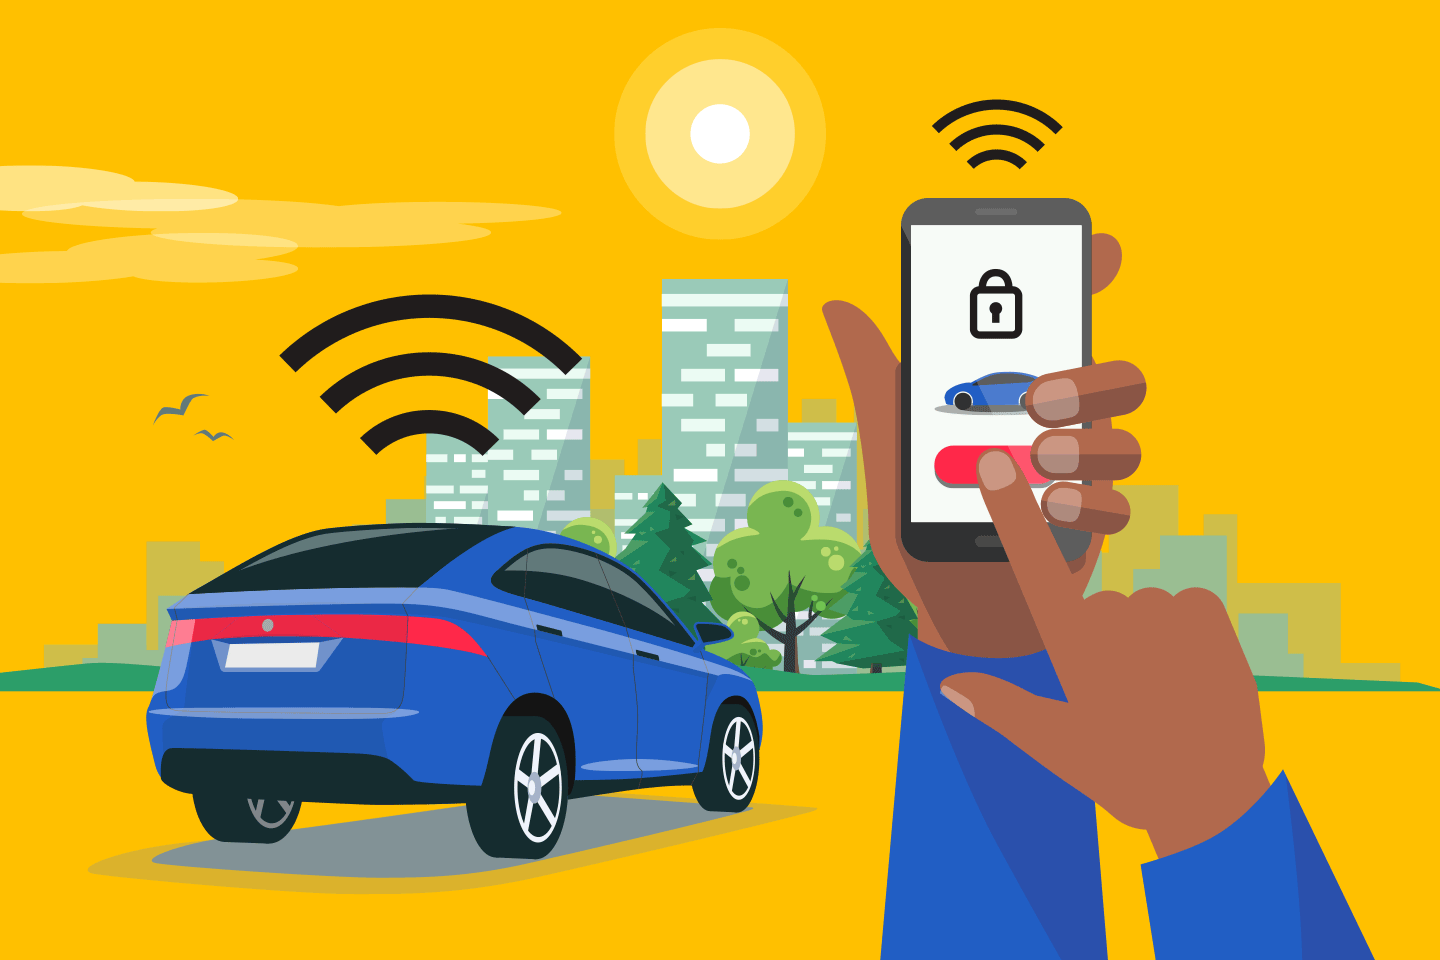 Illustration of person accessing their car through their mobile device